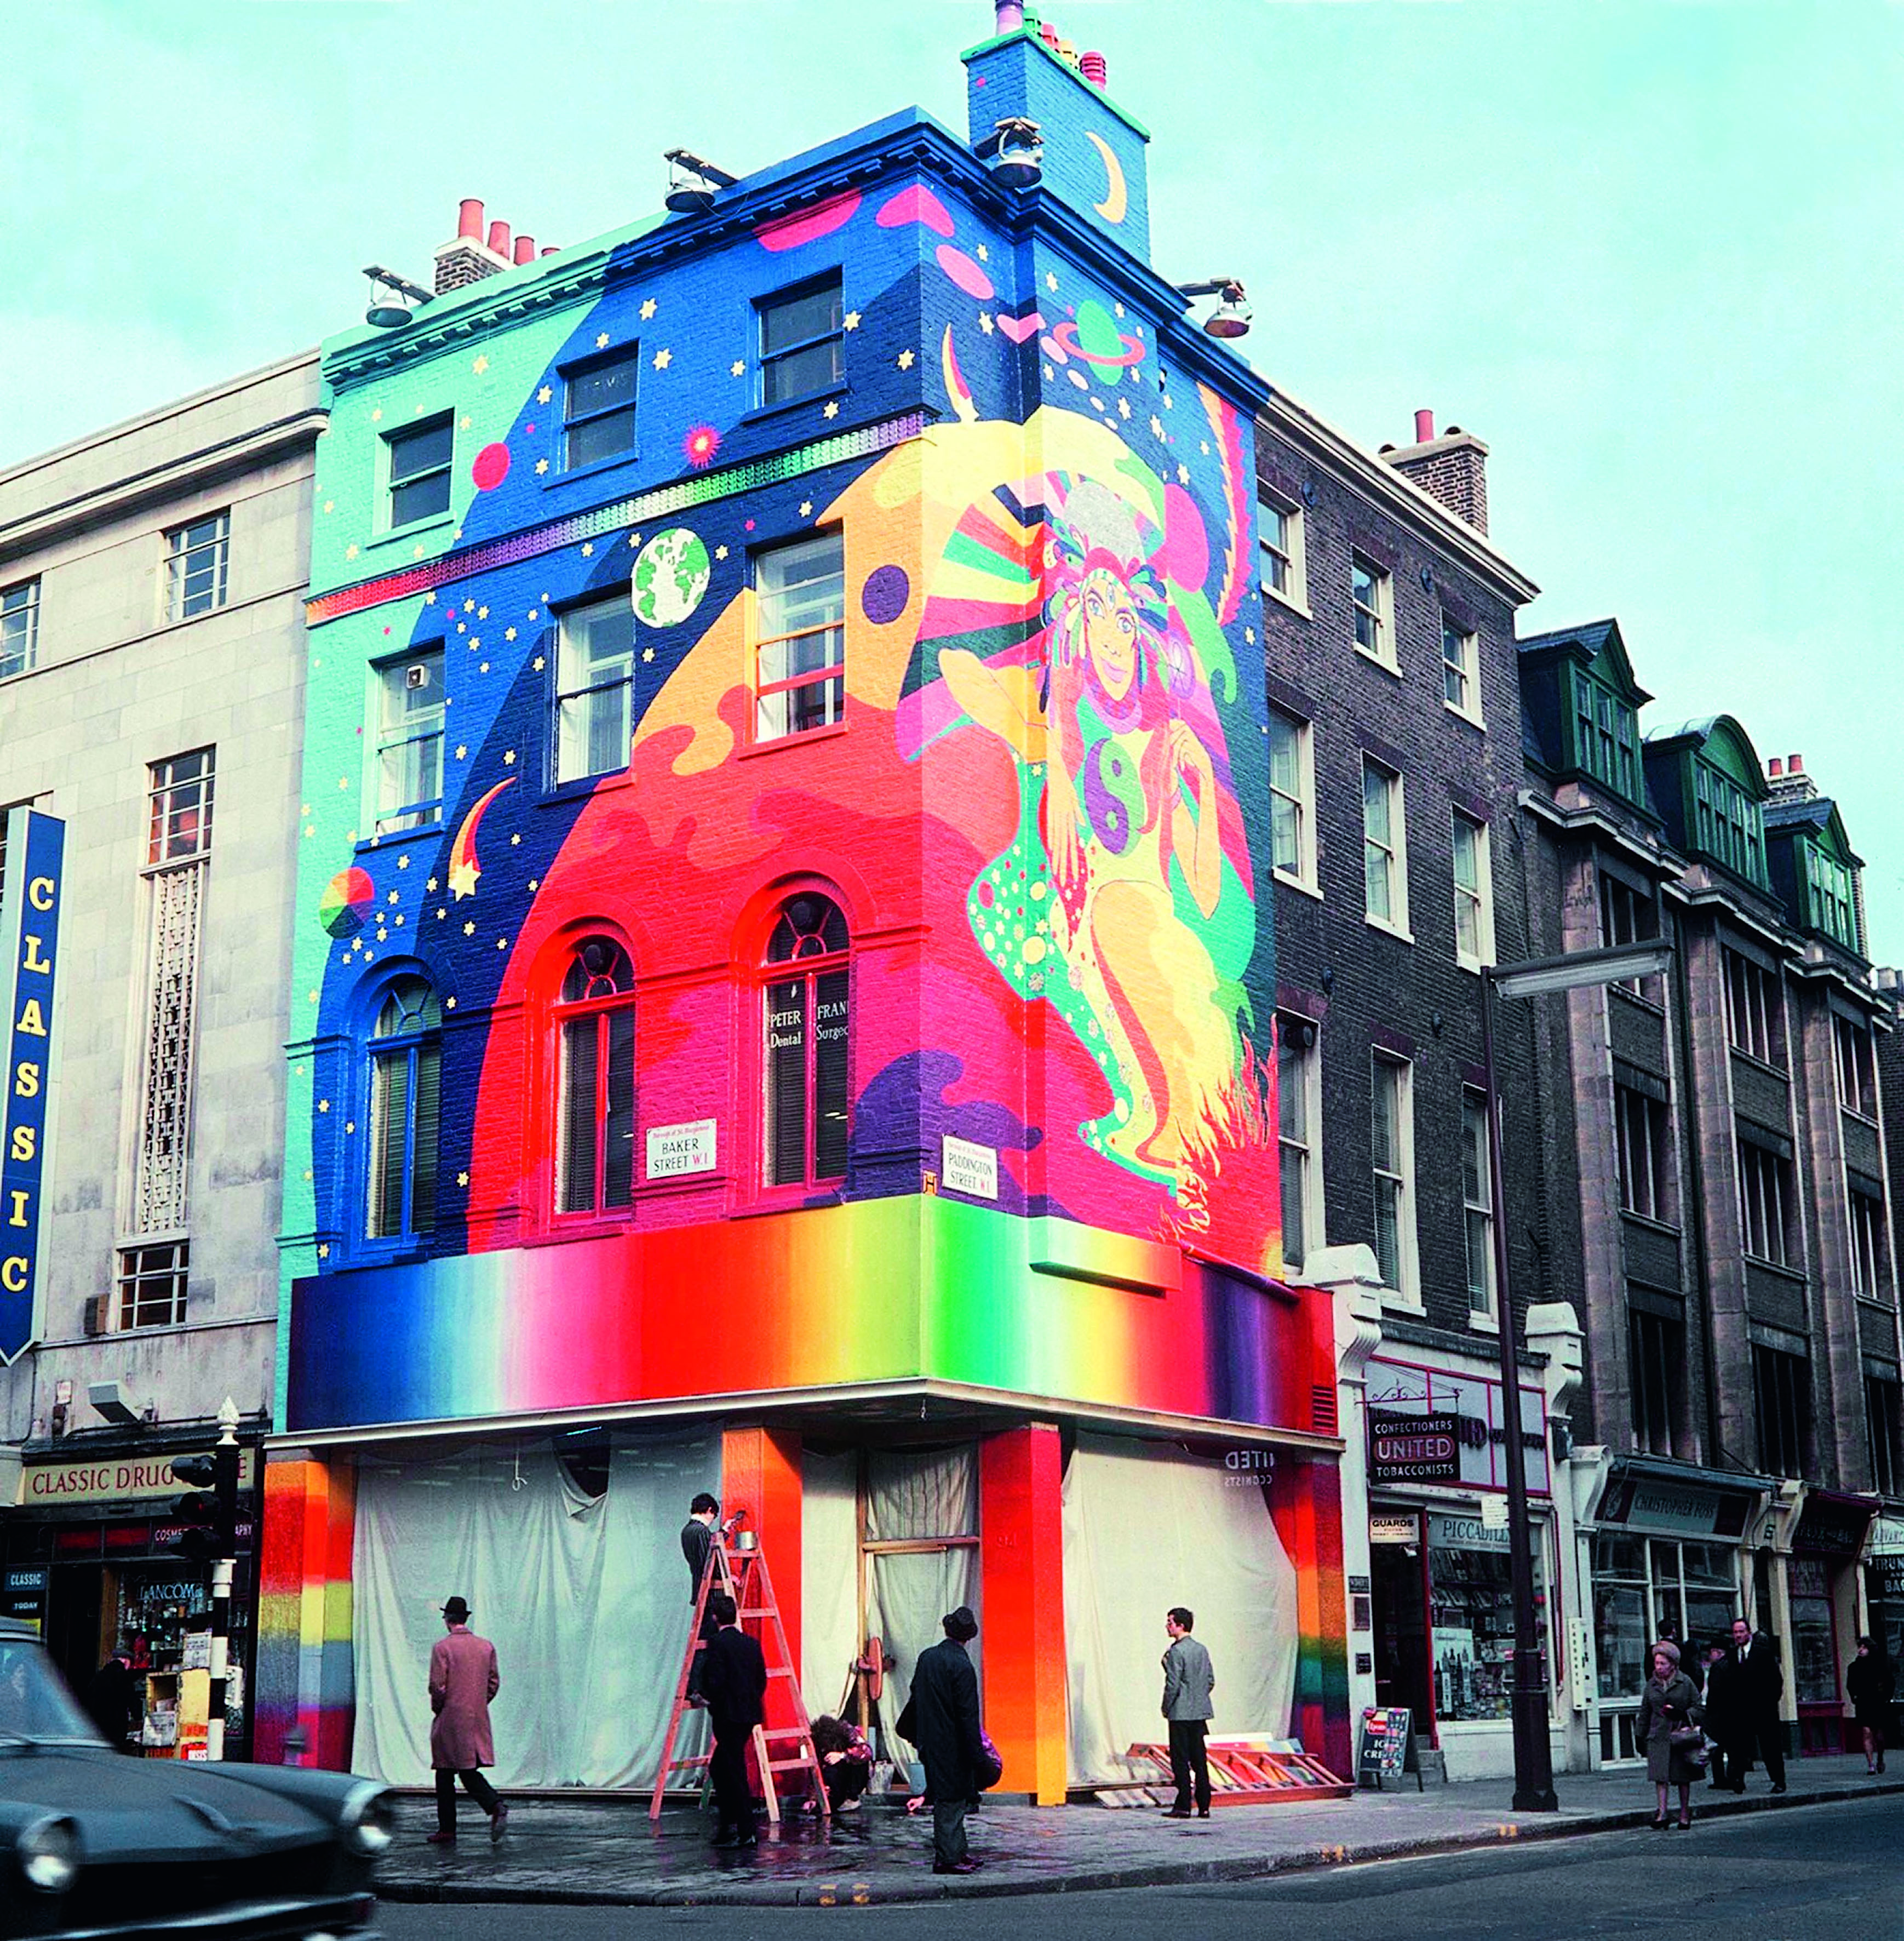 1967. The original Apple Boutique, run by Dutch design group The Fool, who also painted the outside, was on the corner of Paddington Street and Baker Street. Westminster Council immediately made them paint over the psychedelic mural.